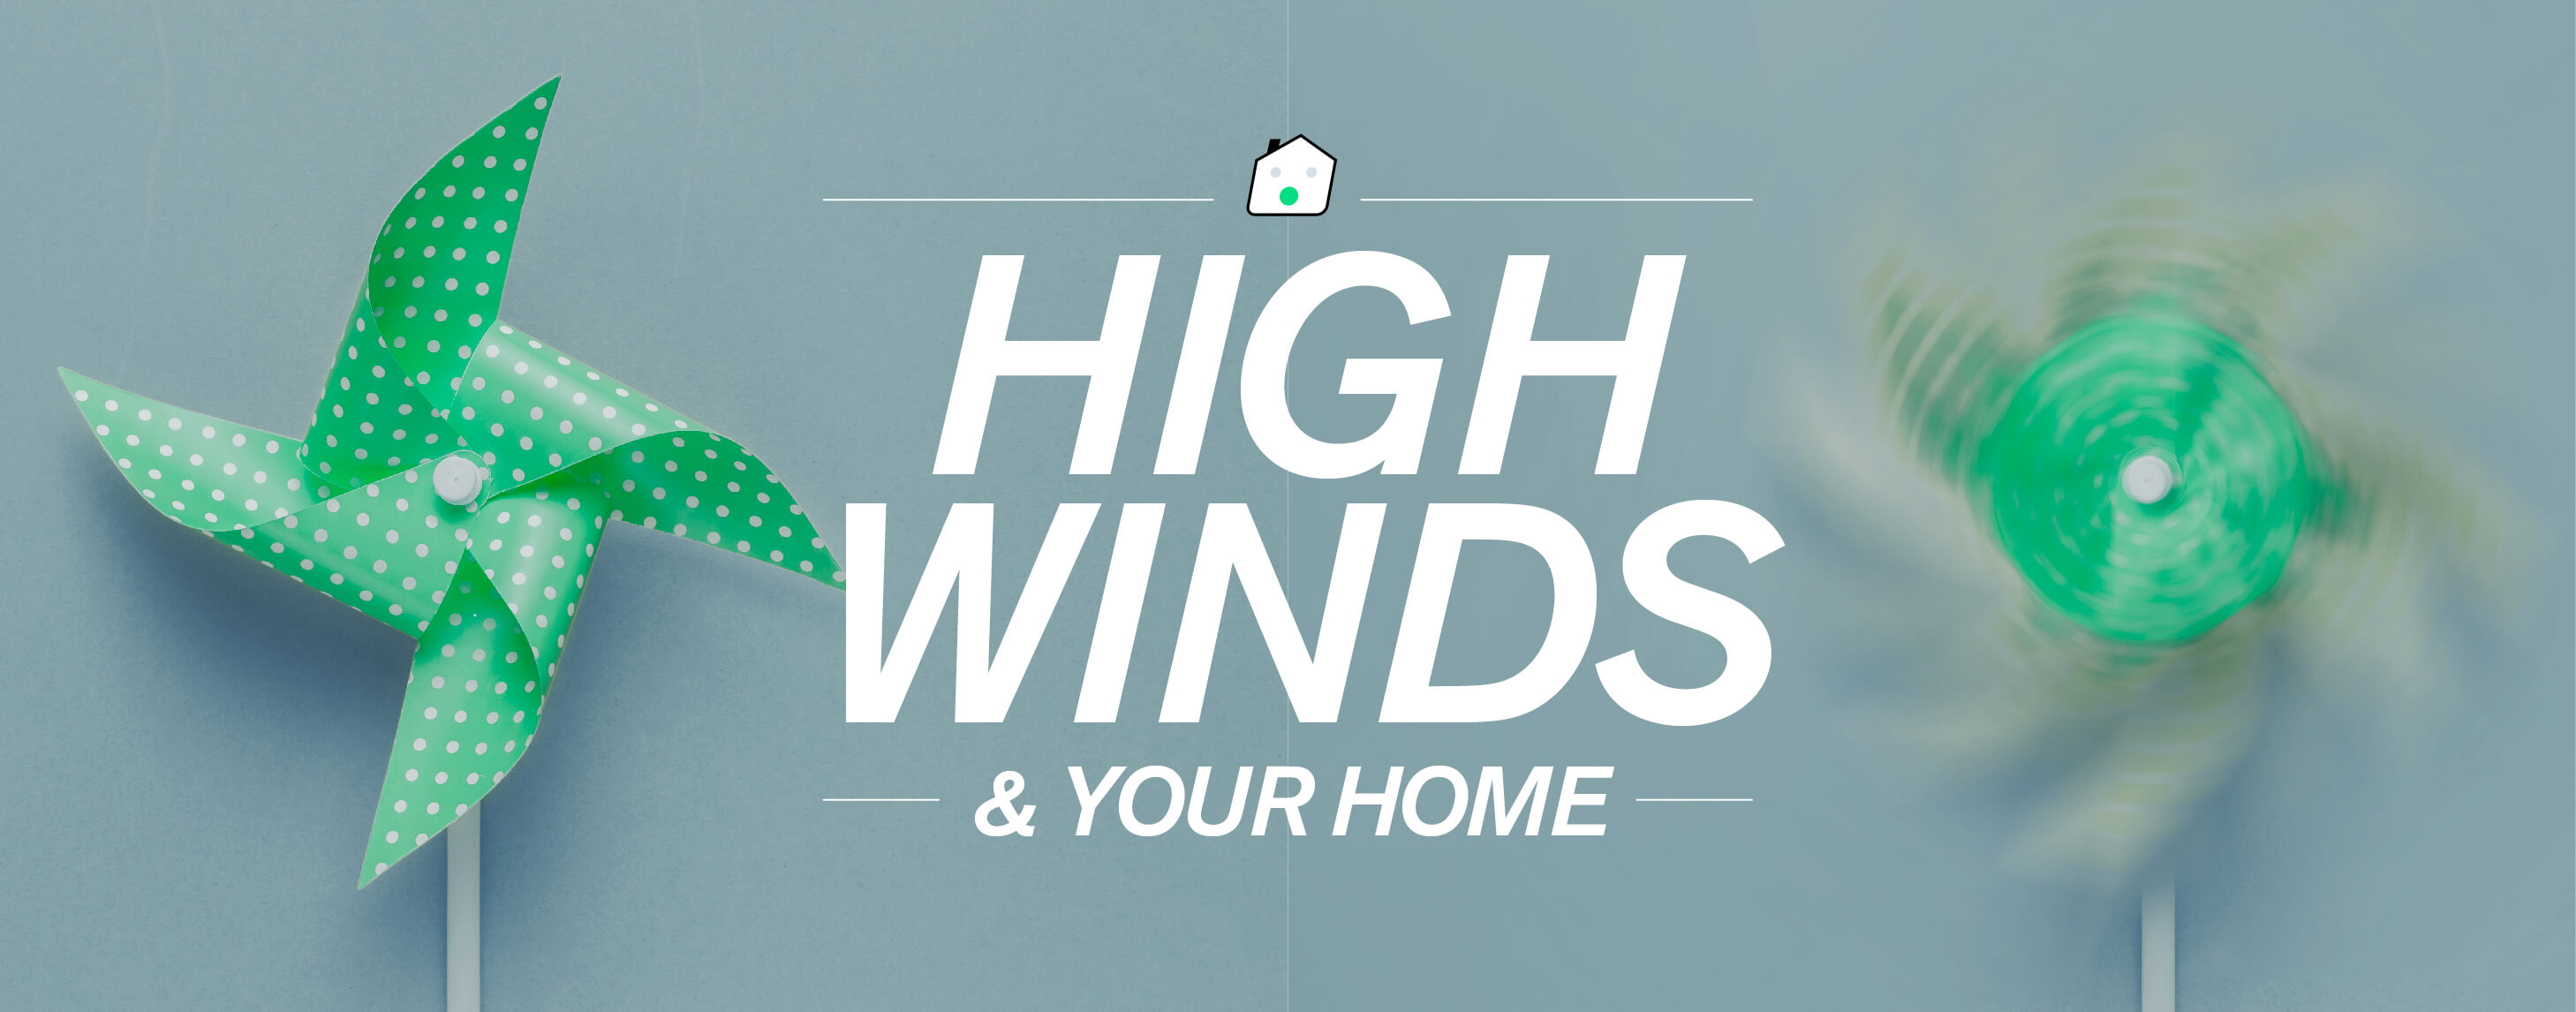 text in the center that says, "high winds & your home" surrounding by two spinning green pinwheels